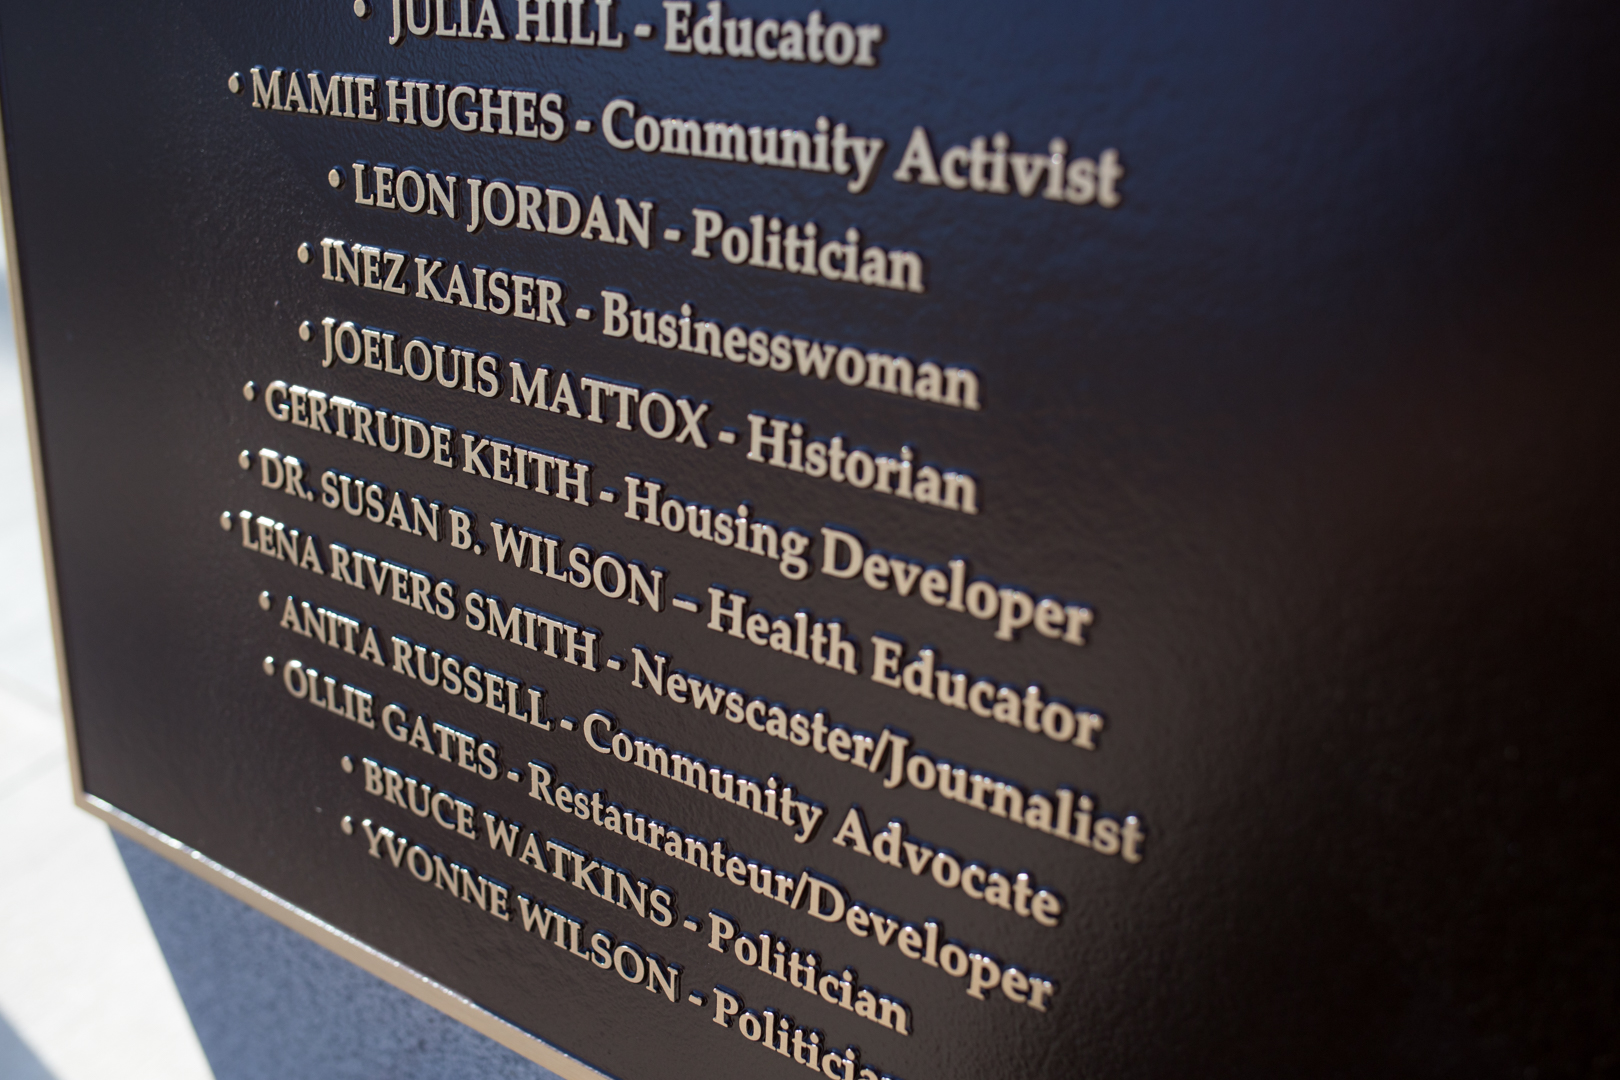 Detail of plaque with Susan Wilson's name